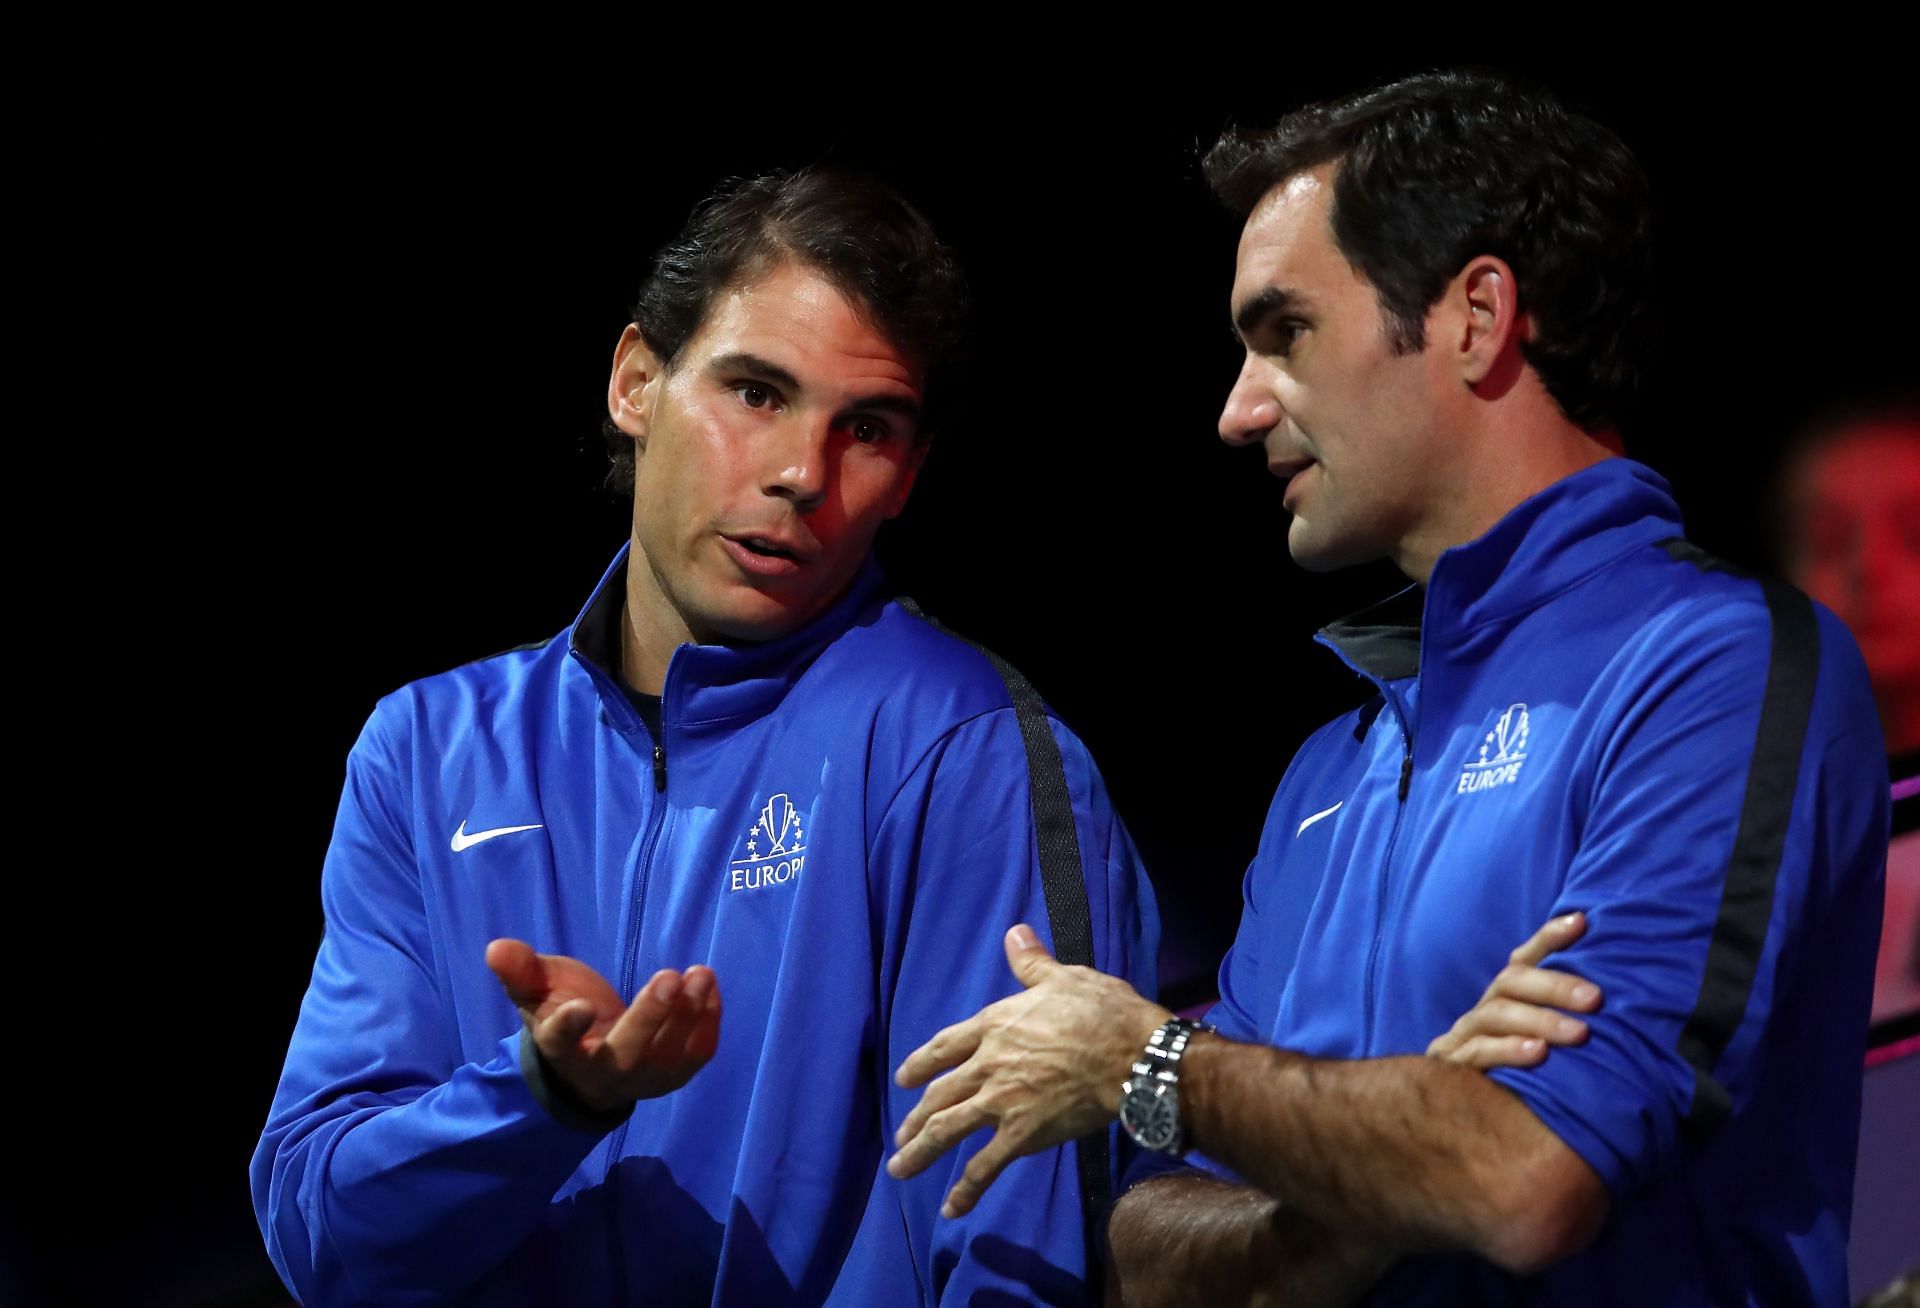 Roger Federer and Rafael Nadal have partnered up for doubles at the Laver Cup only once before